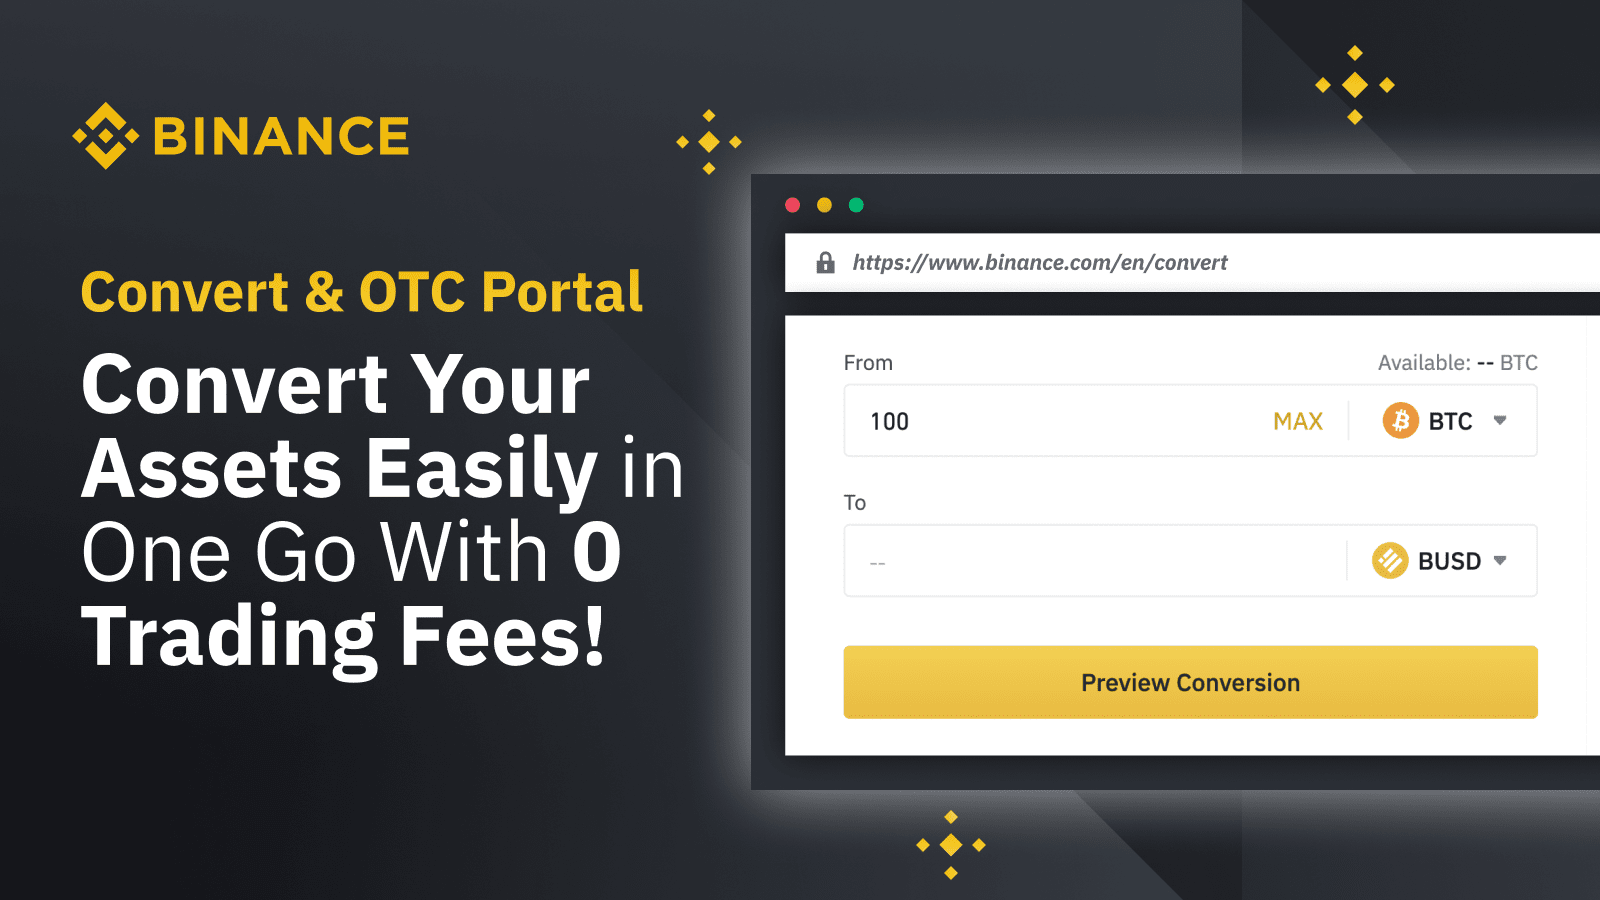 GMT, POLS and More Added to the Convert & OTC Portal, With New Trading Pairs Supported